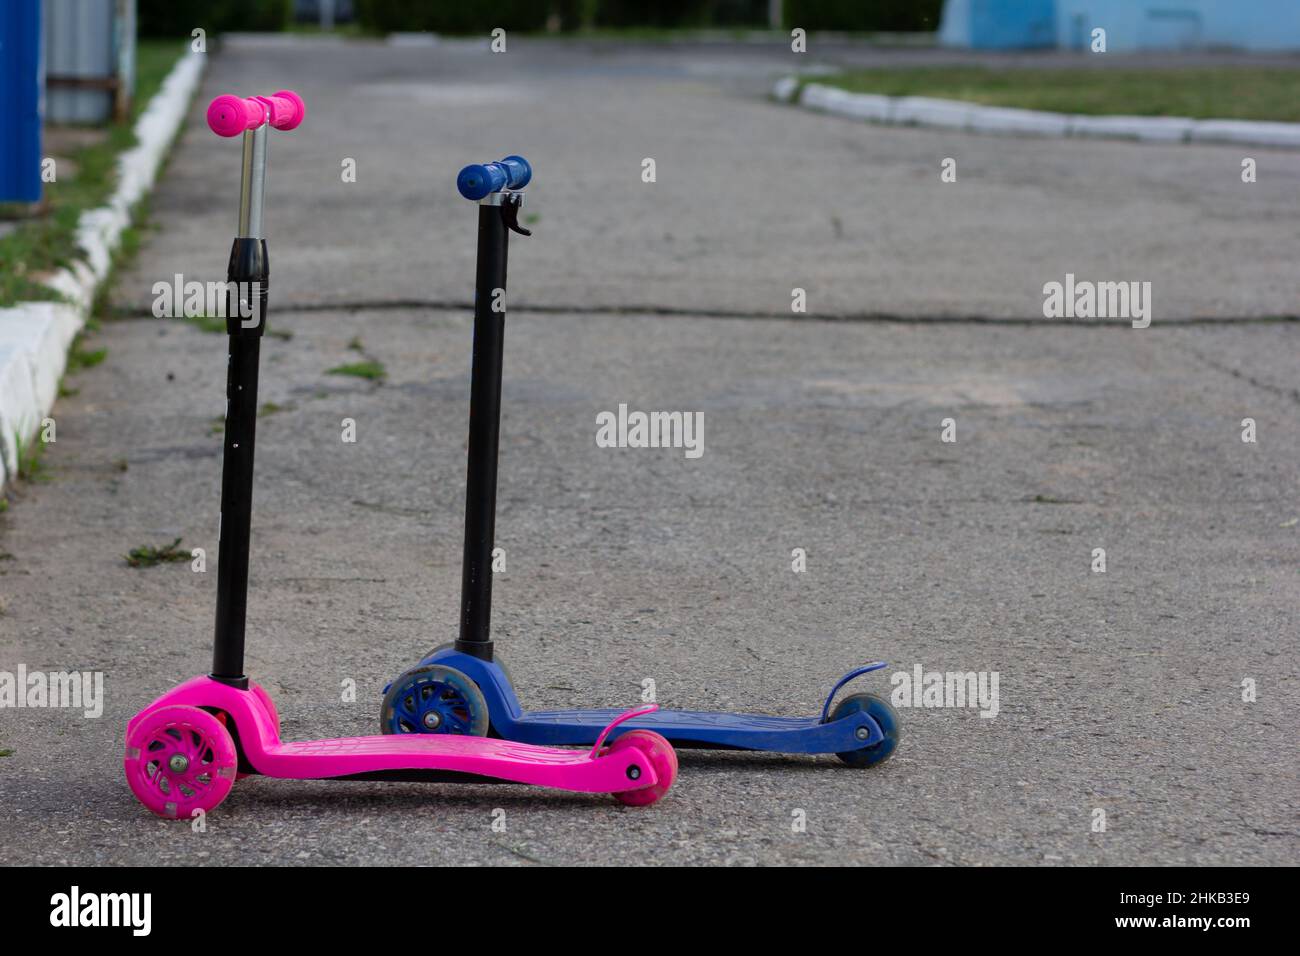 Two scooters pink for girl, blue for boy Stock Photo